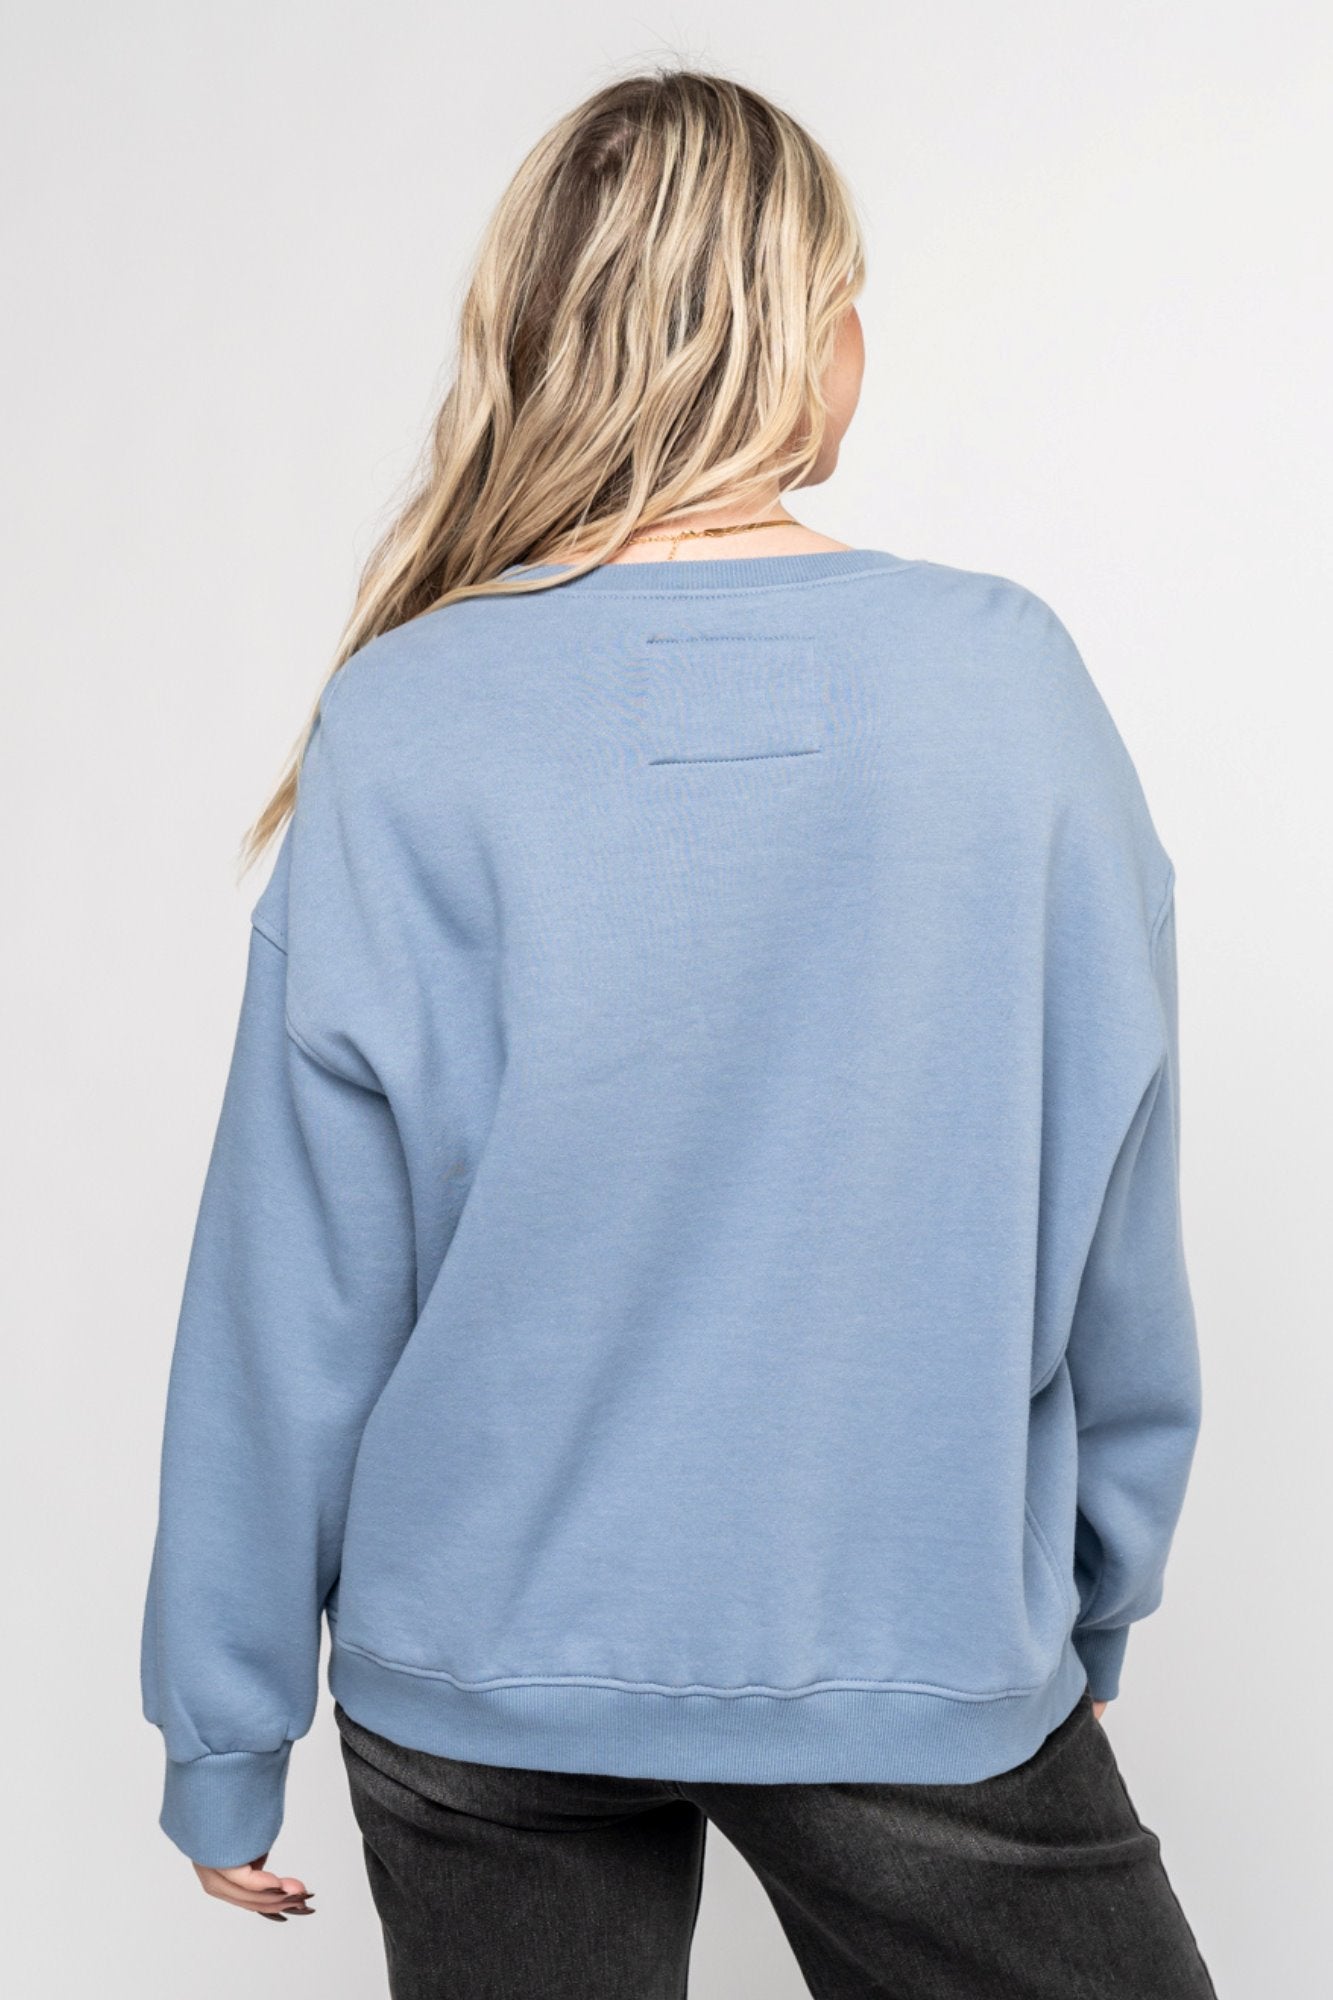 Merrick Pullover in Blue (Small-XL) Holley Girl 